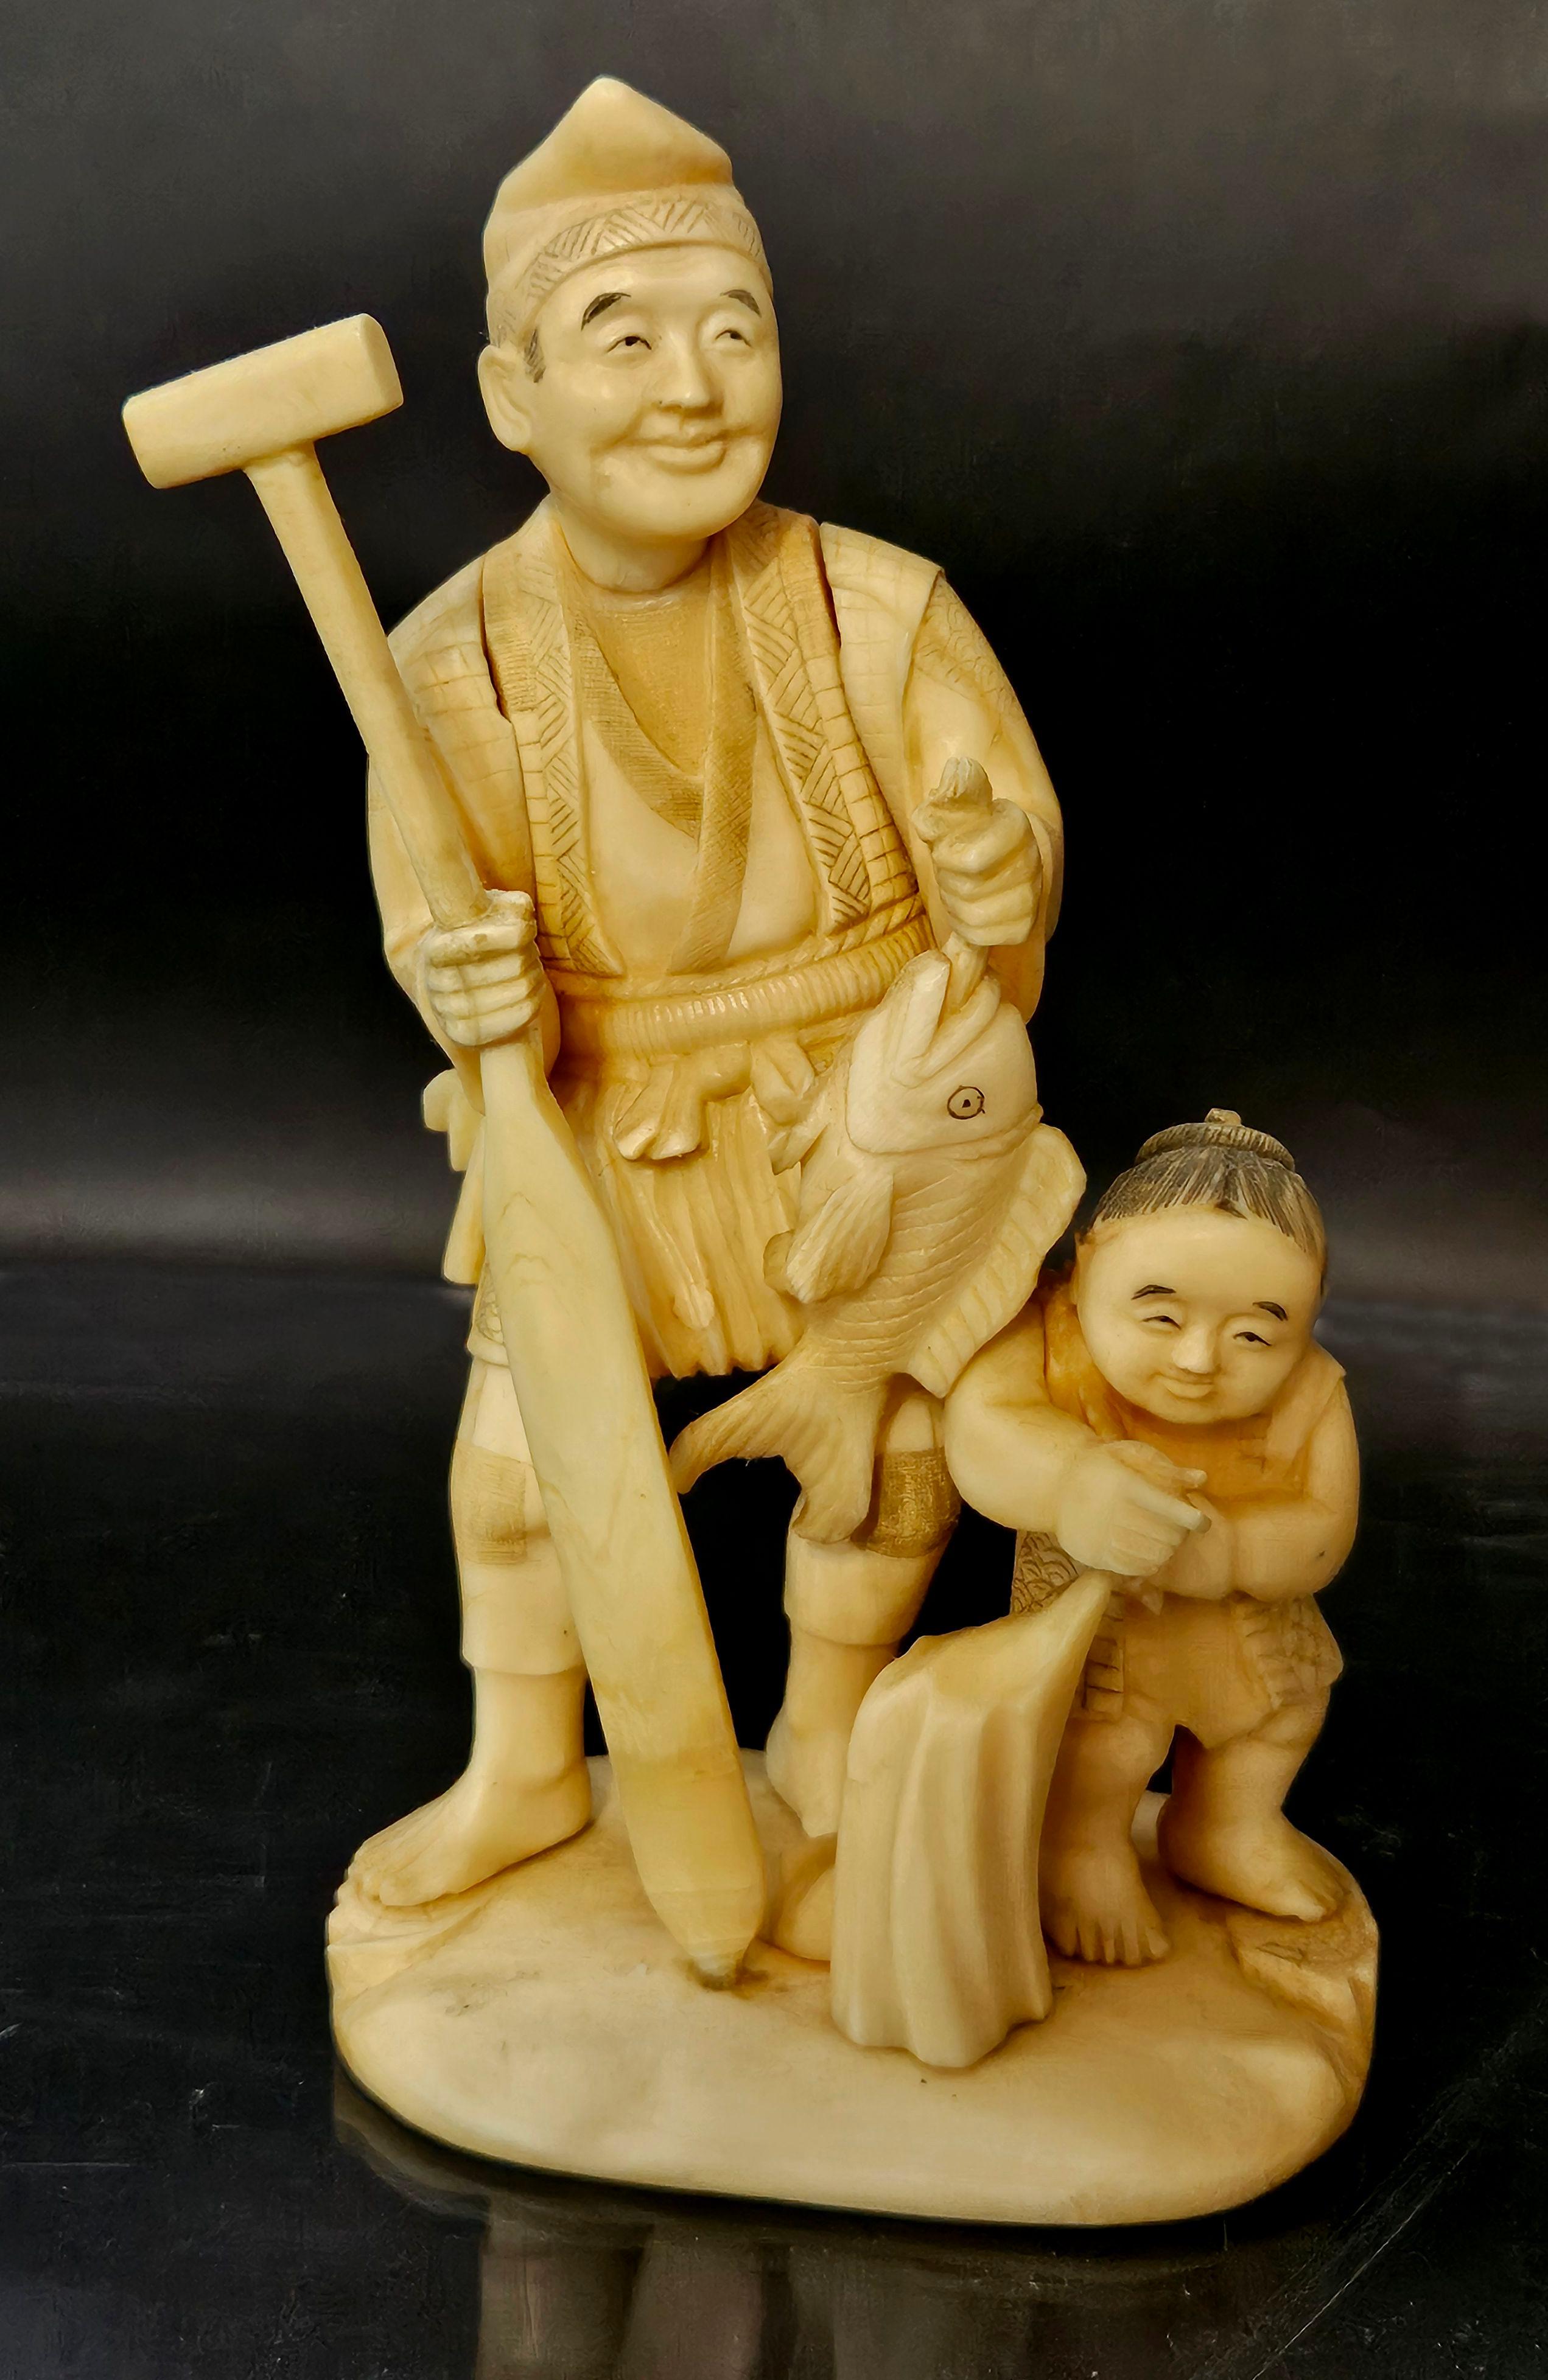 Japan, Meiji Period, a finely carved figurine with outstanding detail of a fisherman and his kid. The man has a peddle on his right and a fisher on his left hand. The kid also has a fisher on his back and it can be seen from the backside.
The artist